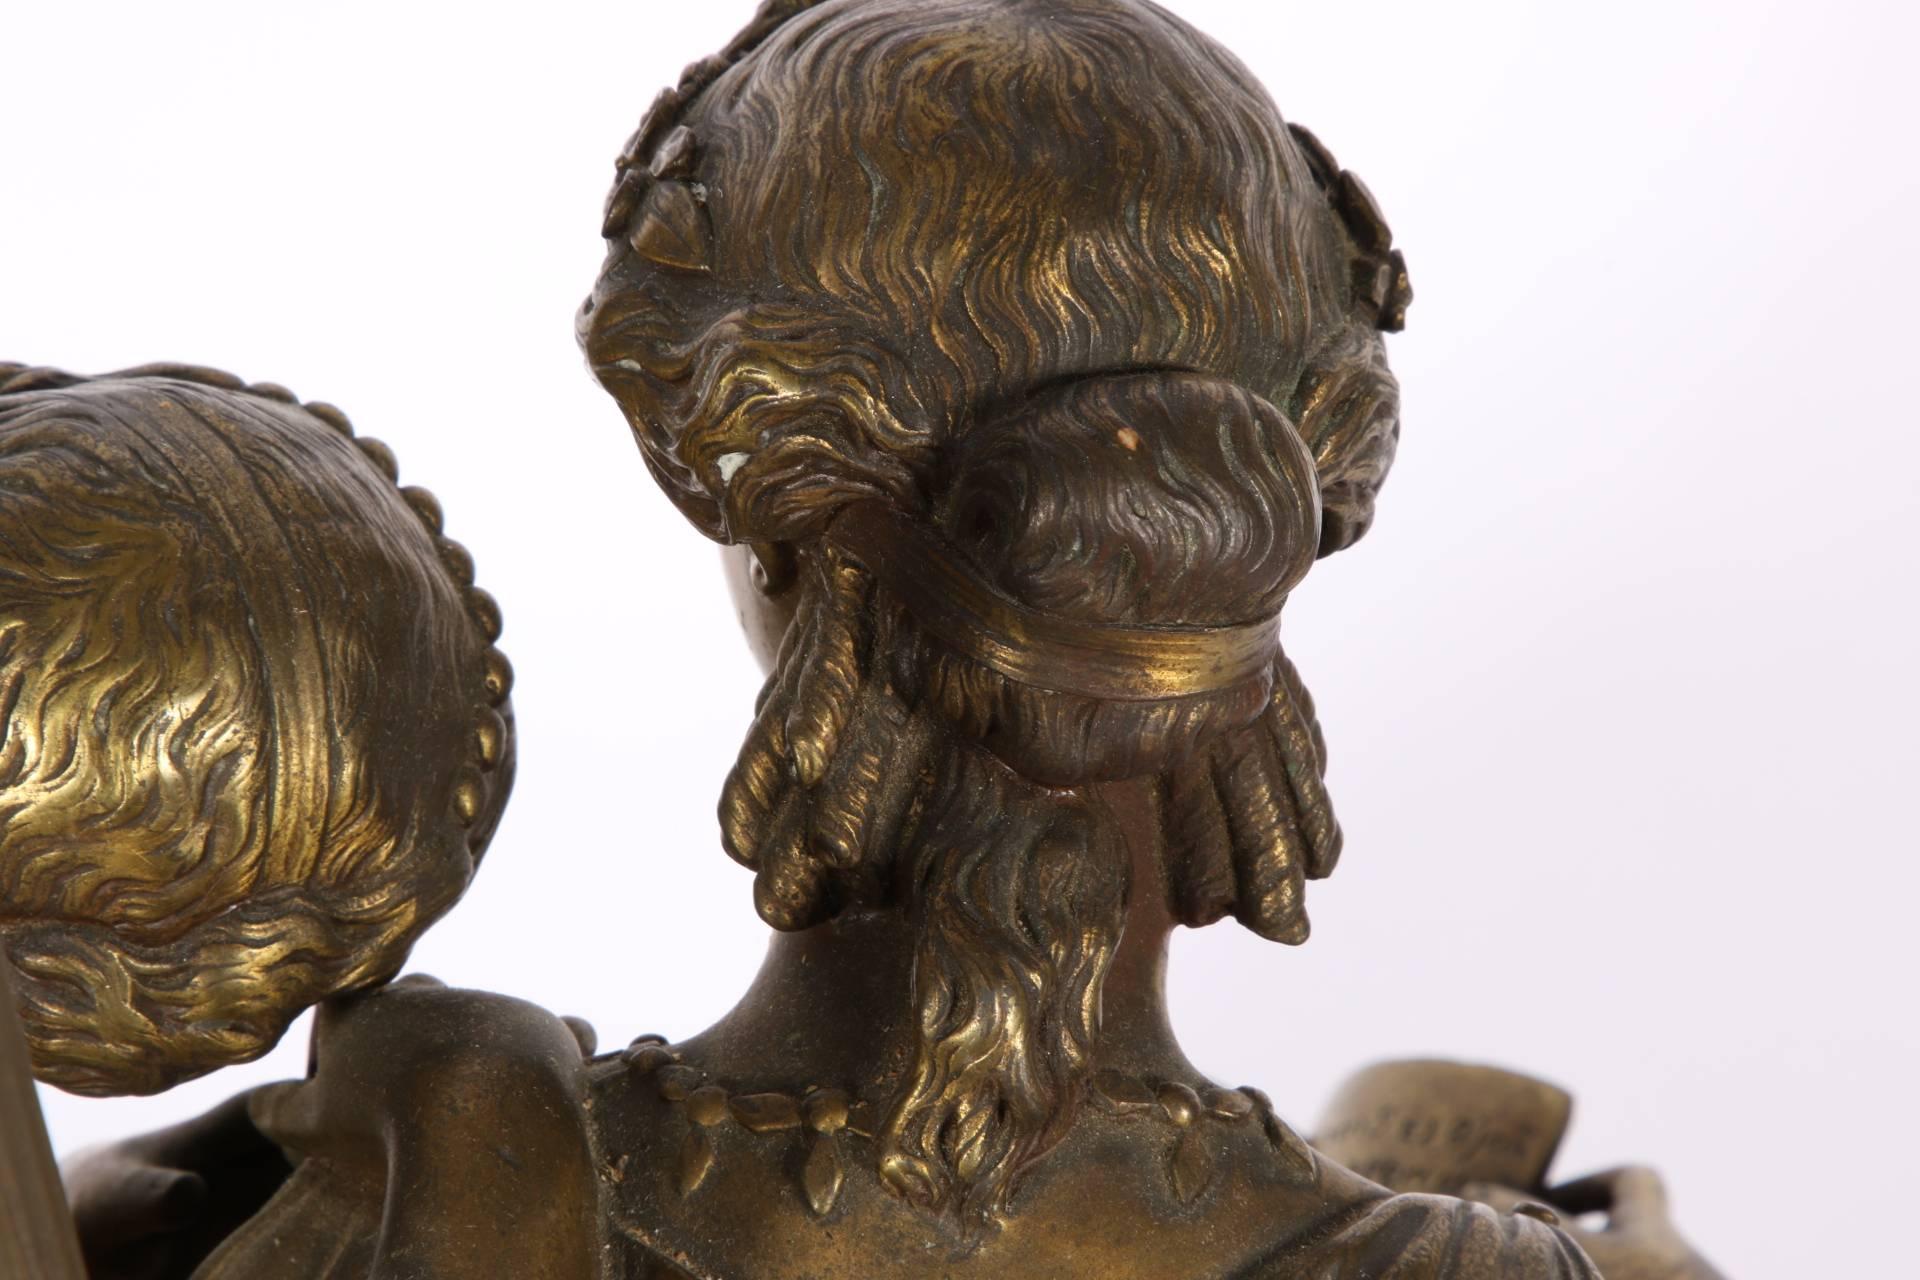 Cast bronze. A pair of neoclassical female figures dressed in heavy drapery and seated on a bench while pouring over a book. Mounted on a black painted metal base. Marked 16141 on the lower left back of the bronze. With attached lamp standard.